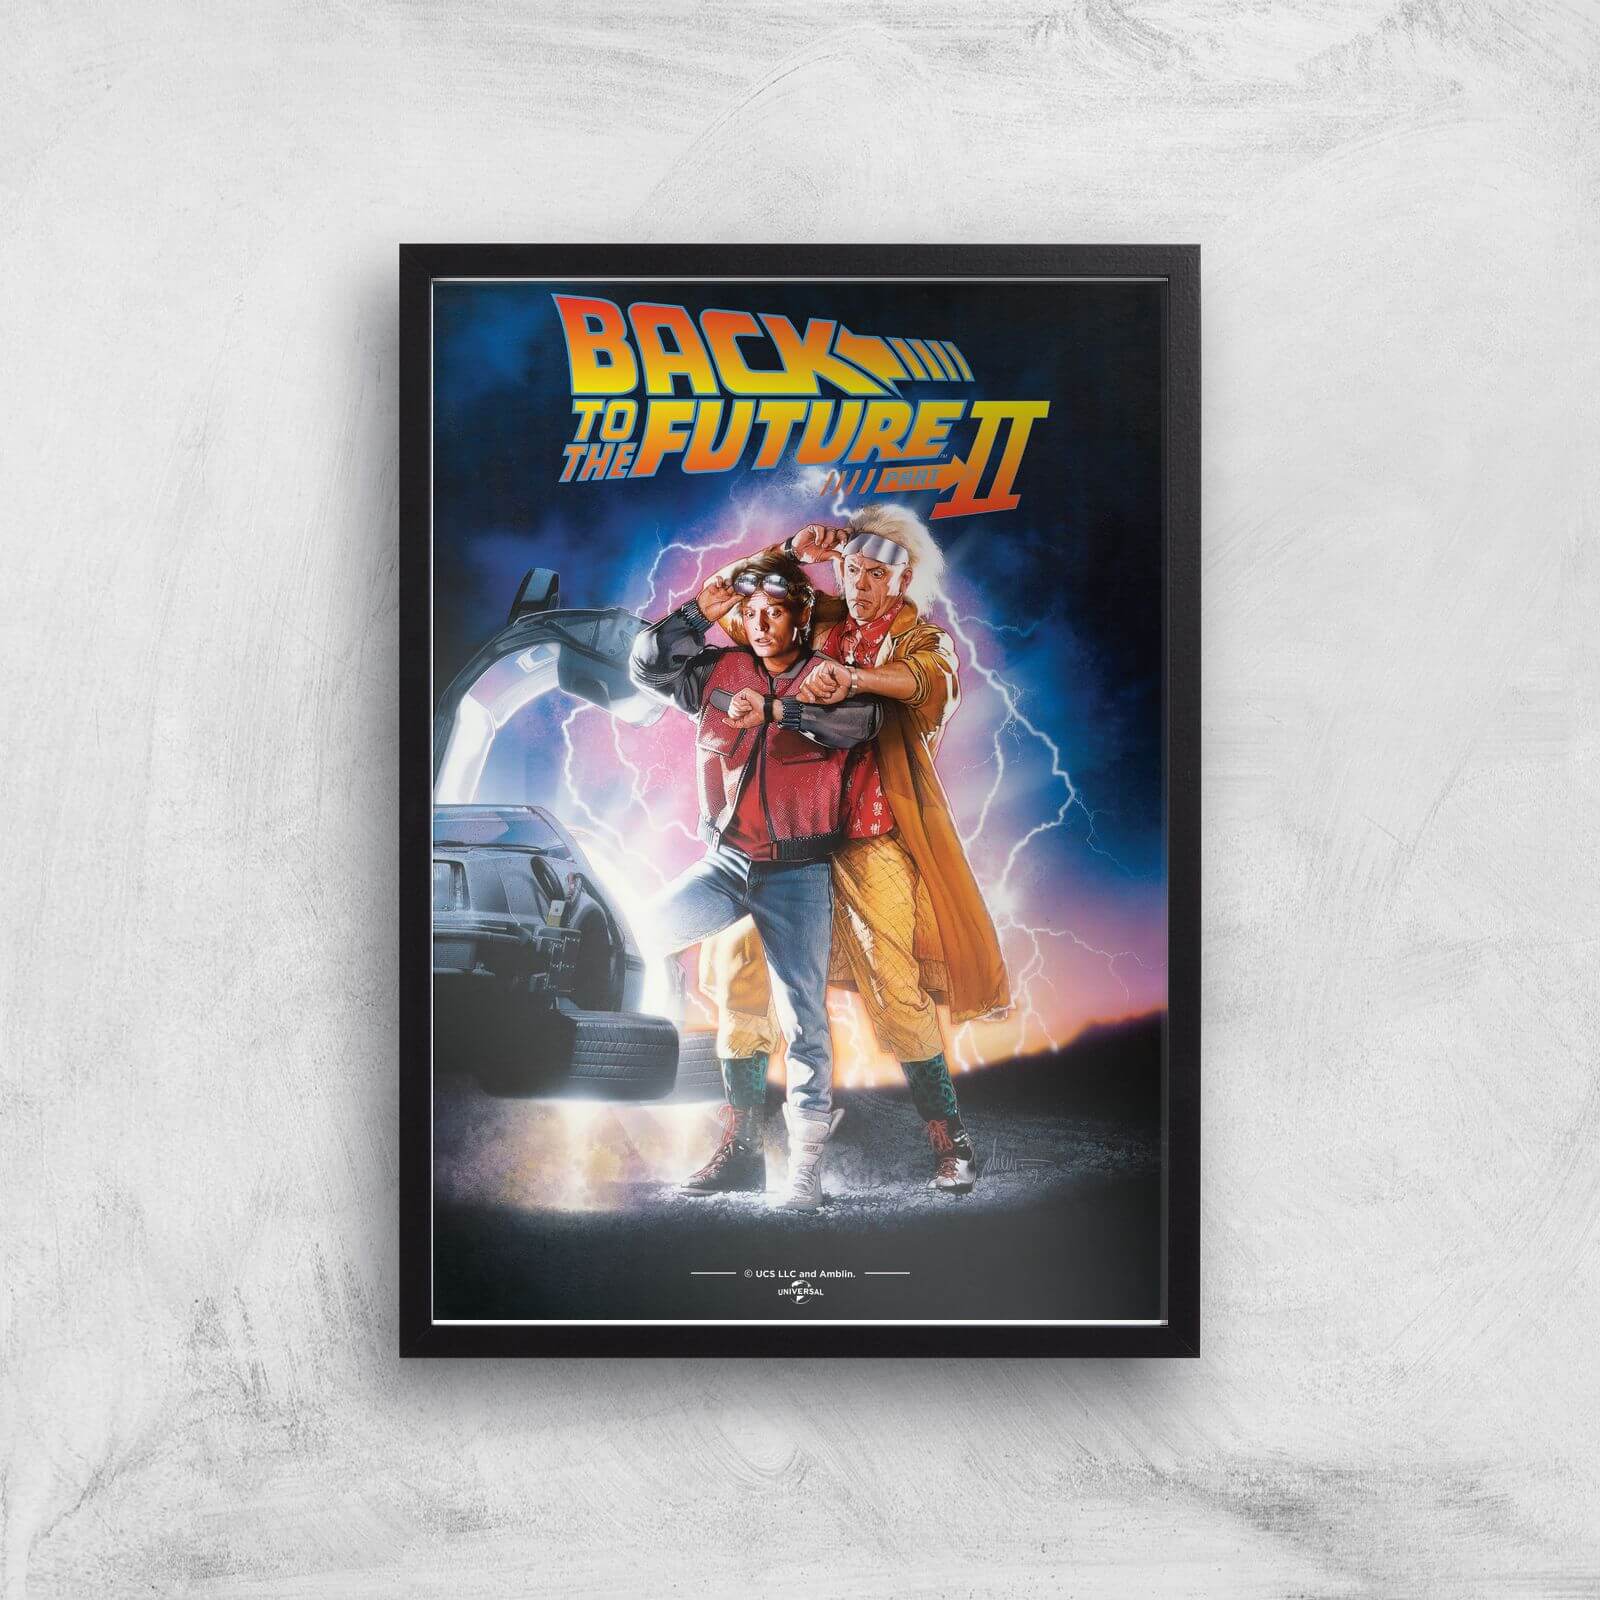 Back To The Future Part 2 Giclee Art Print - A3 - Black Frame